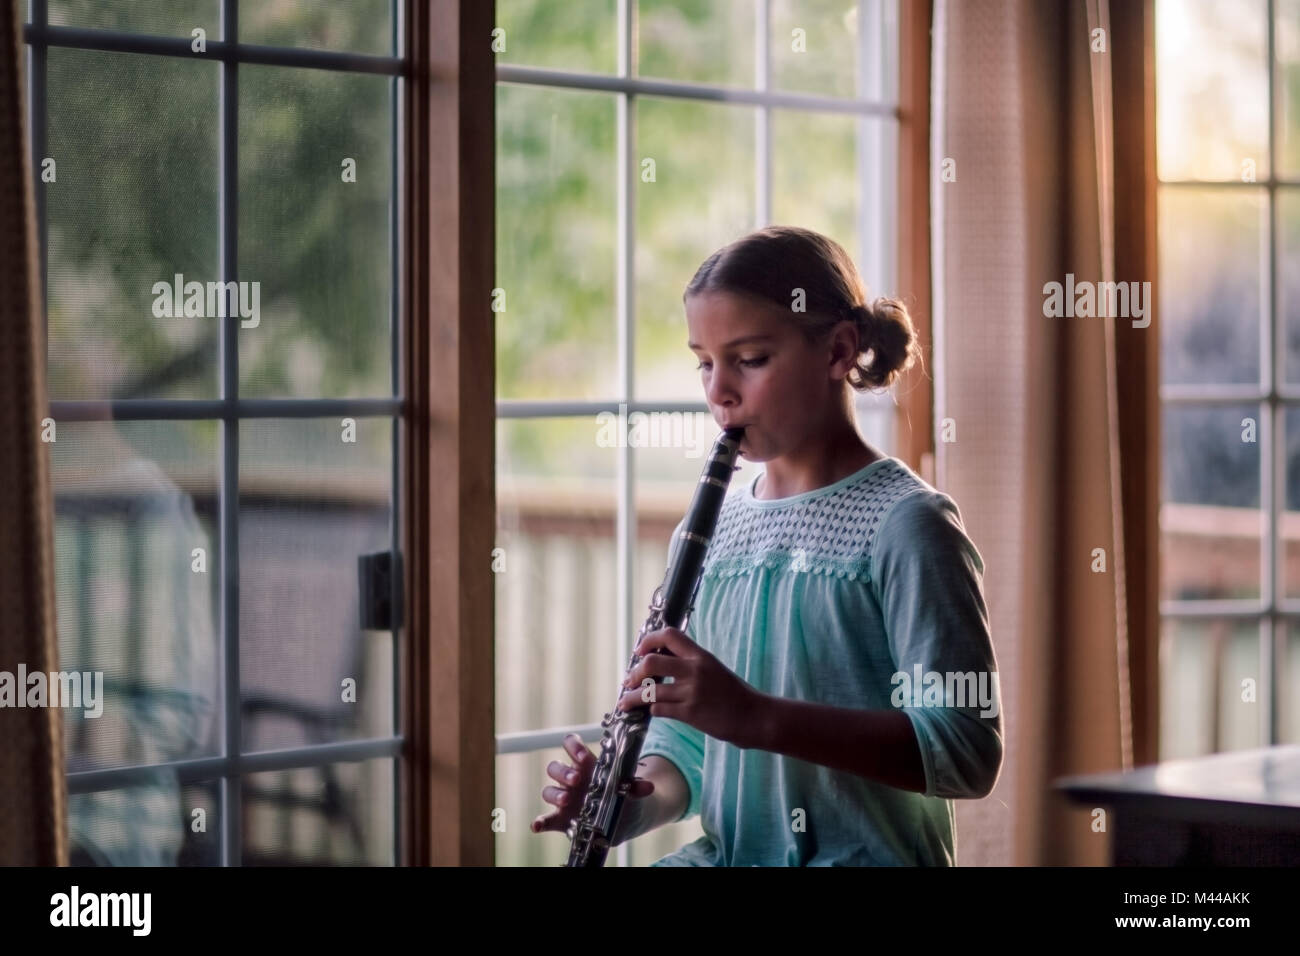 Young clarinettist playing her clarinet Stock Photo